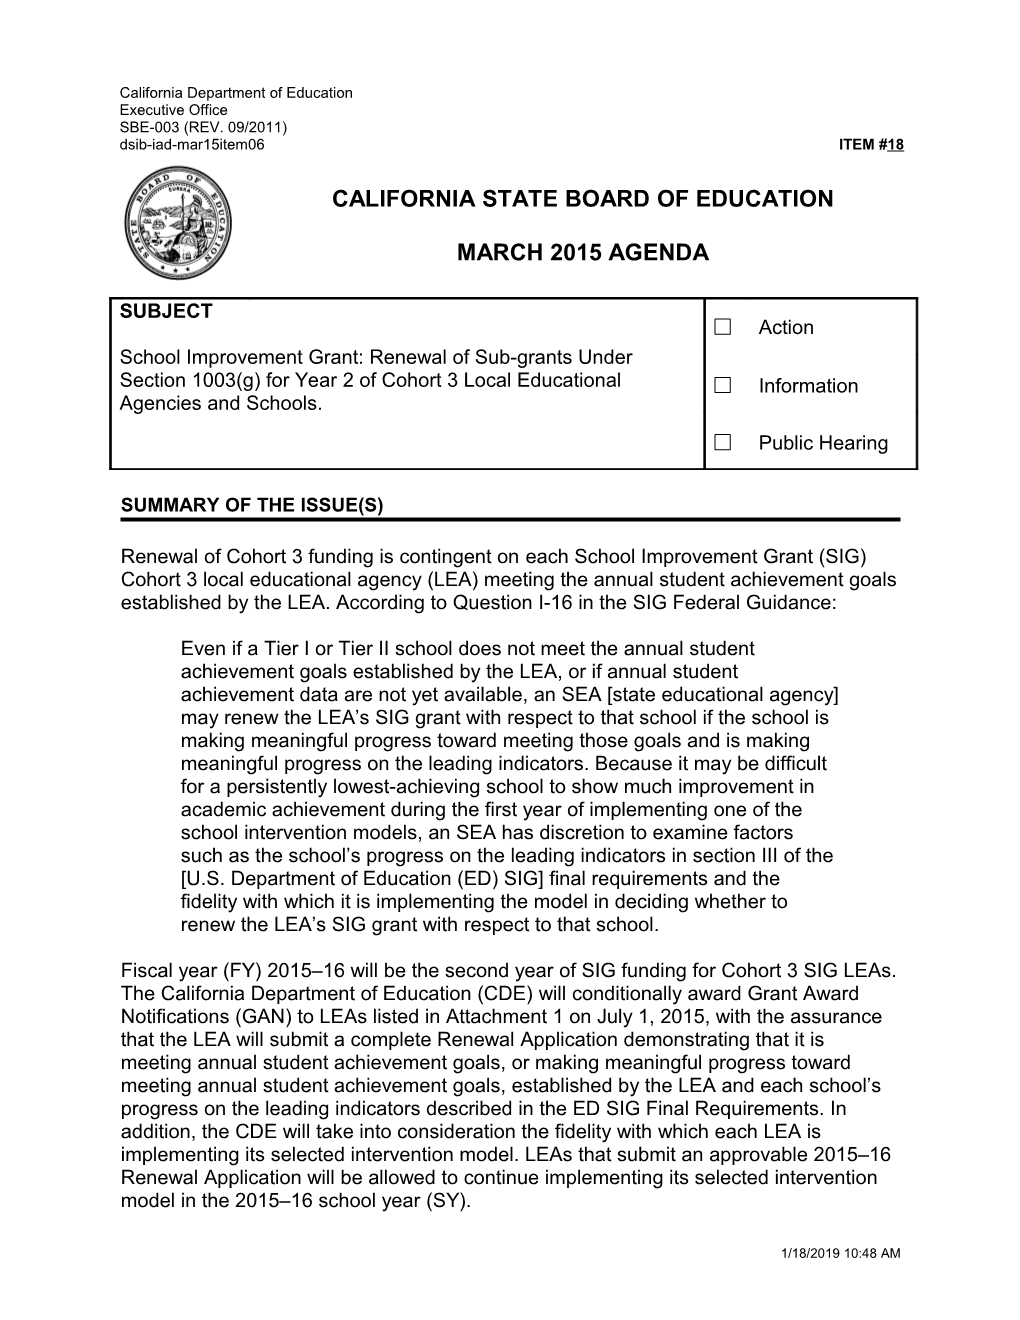 March 2015 Agenda Item 18 - Meeting Agendas (CA State Board of Education)